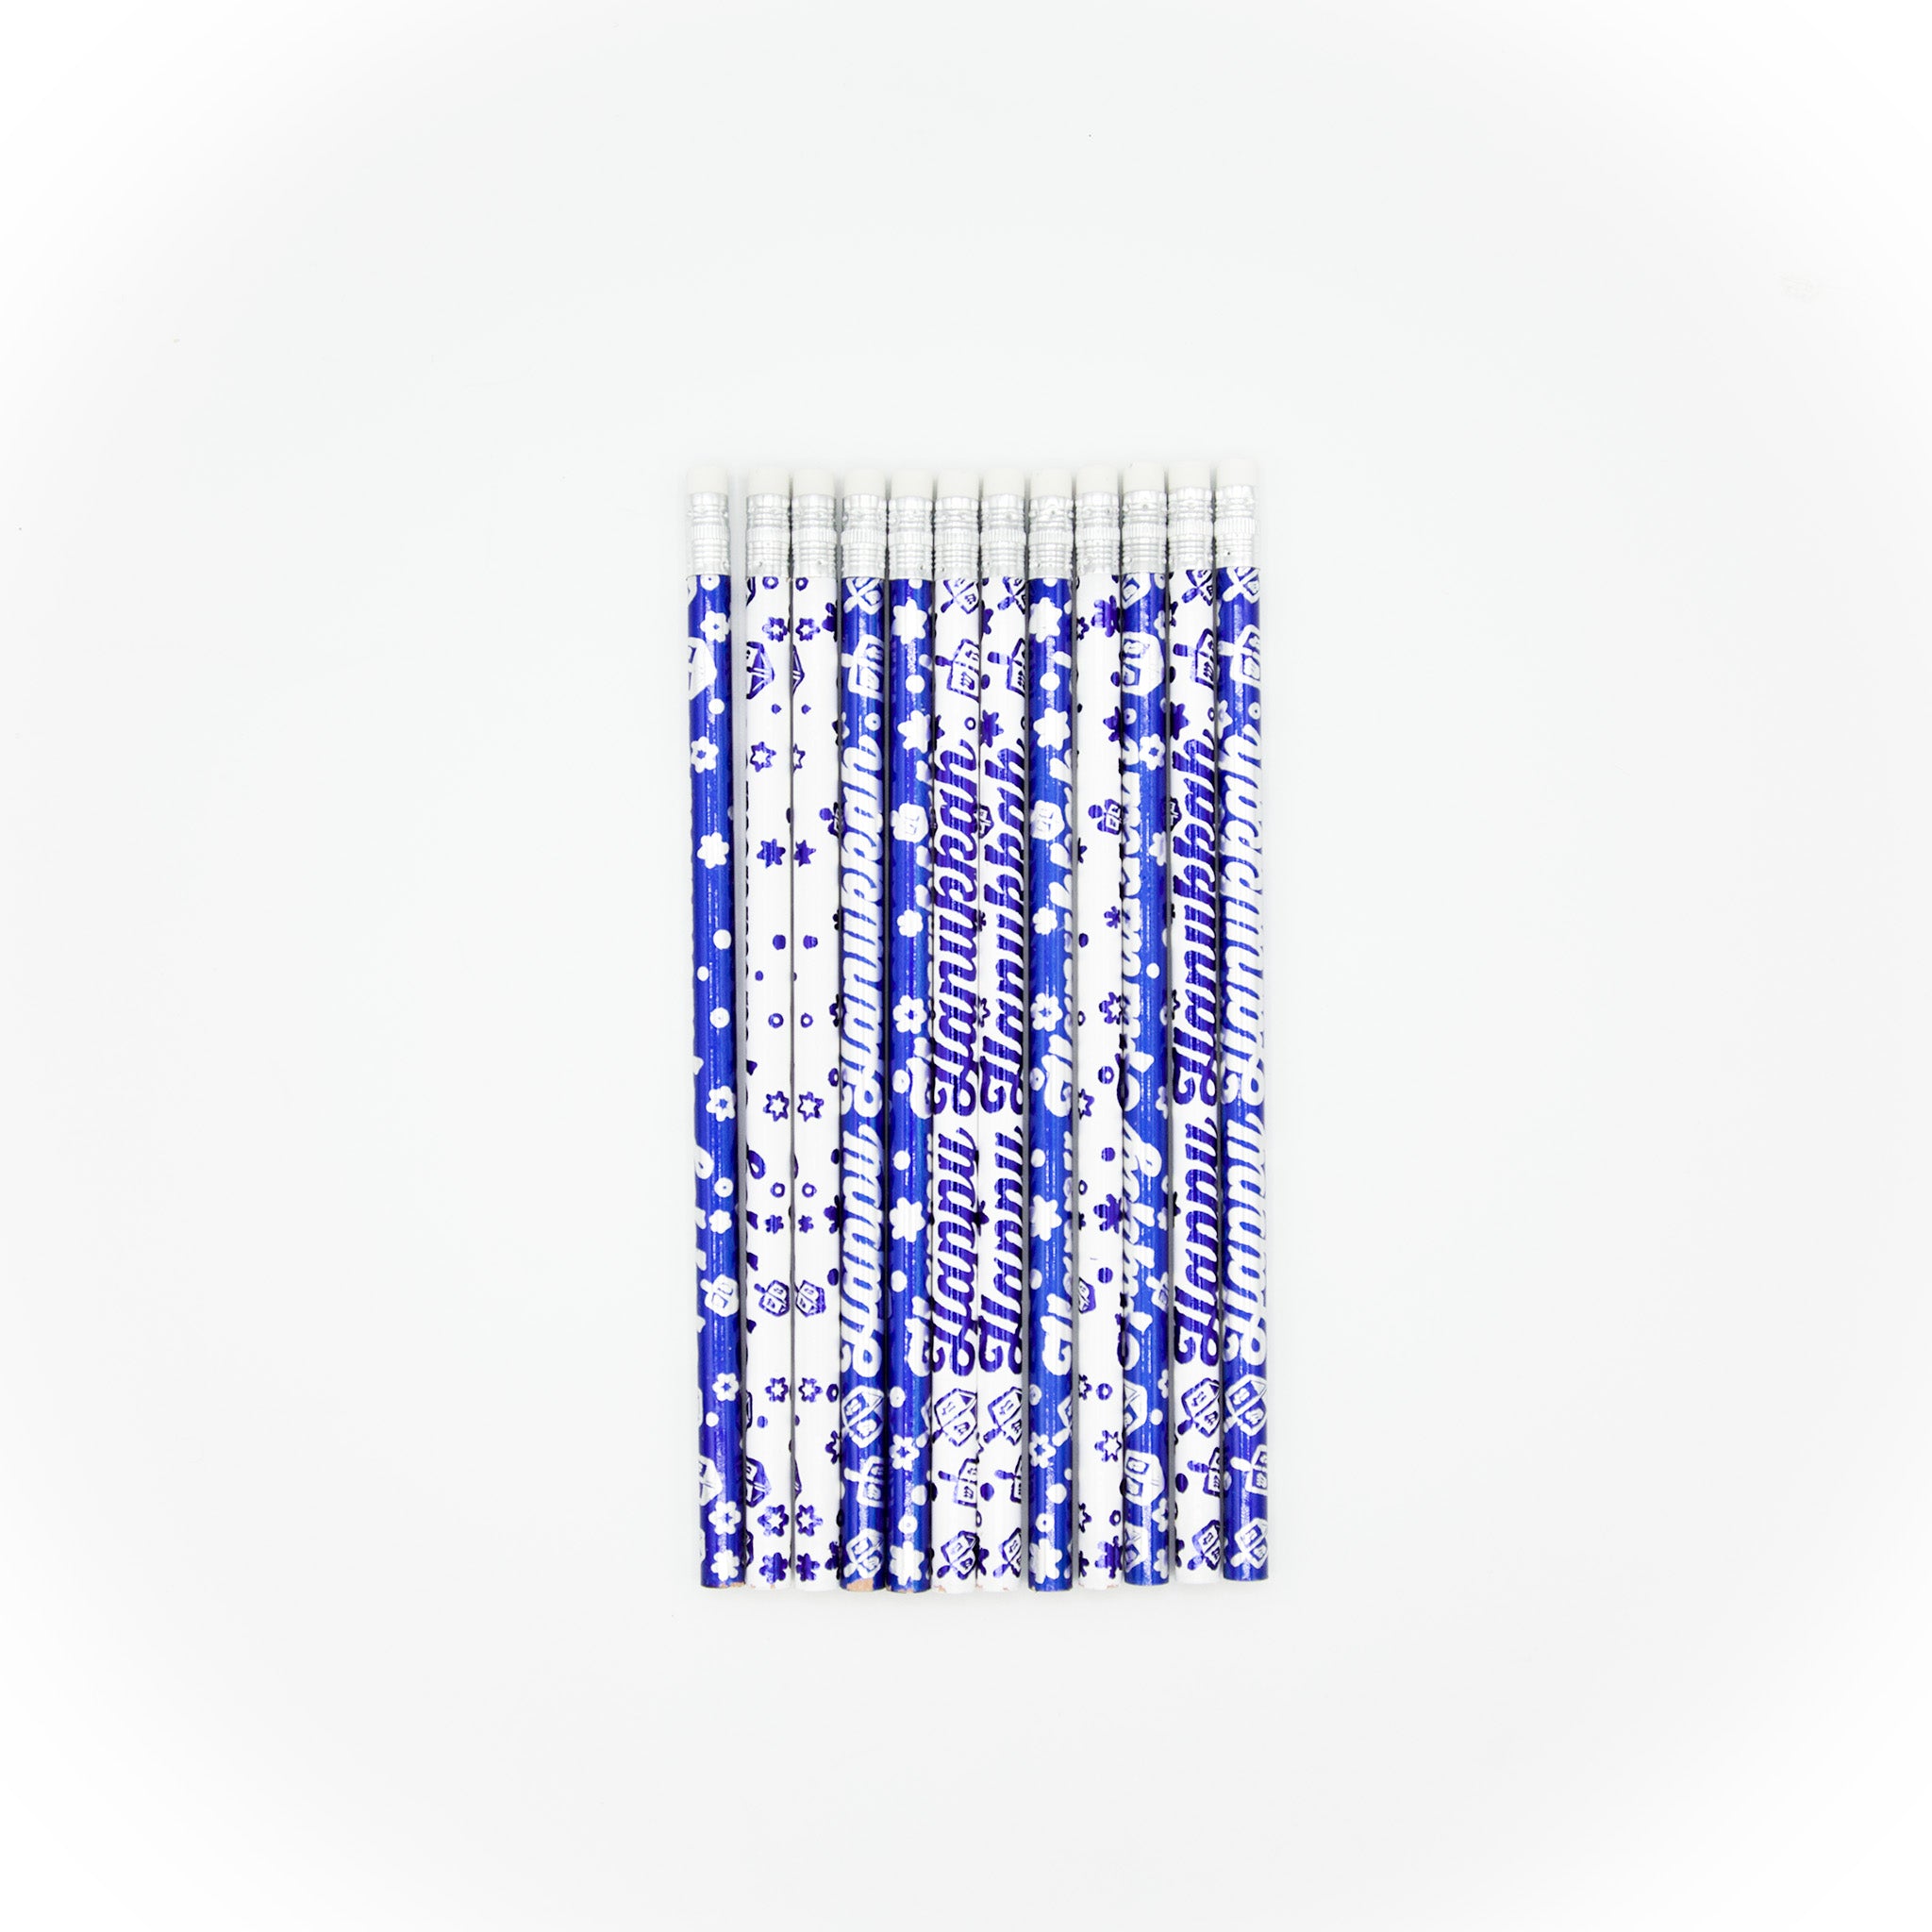 Musgrave Pencil MUS2217G Happy Birthday Wishes Pencil - Pack of 144